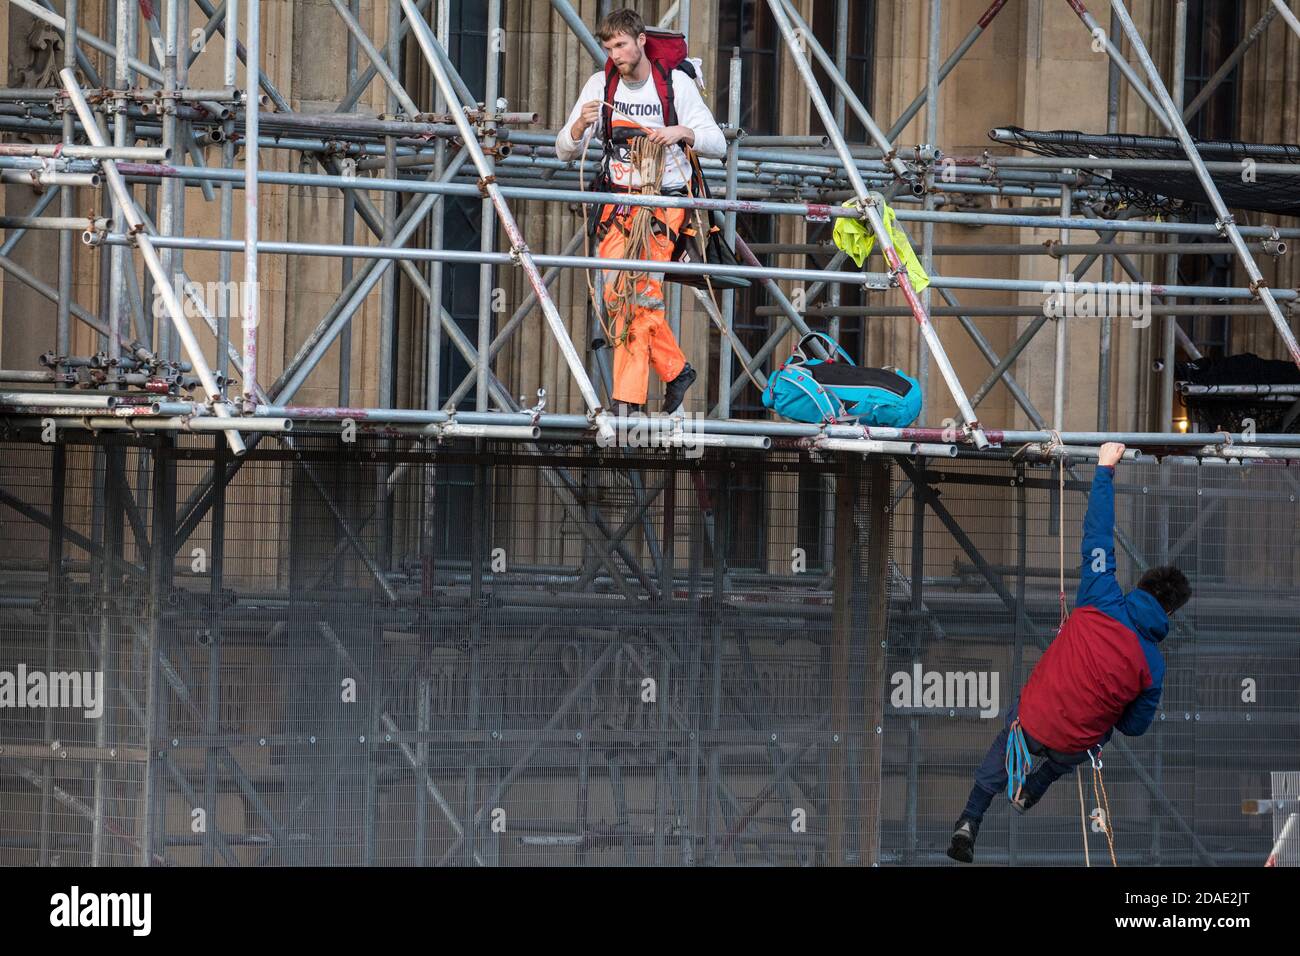 London, UK. 12th November, 2020. Activists from the group Action for Climate Truth and Reparations (ACTR) climb scaffolding to hang an open letter to the UK people from Africans Rising For Justice, Peace and Dignity from the Houses of Parliament. The letter, which launches Africans Rising’s ReRight History campaign, contains a plea to the UK people to start making amends for the harm caused by slavery and colonialism.  Credit: Mark Kerrison/Alamy Live News Stock Photo